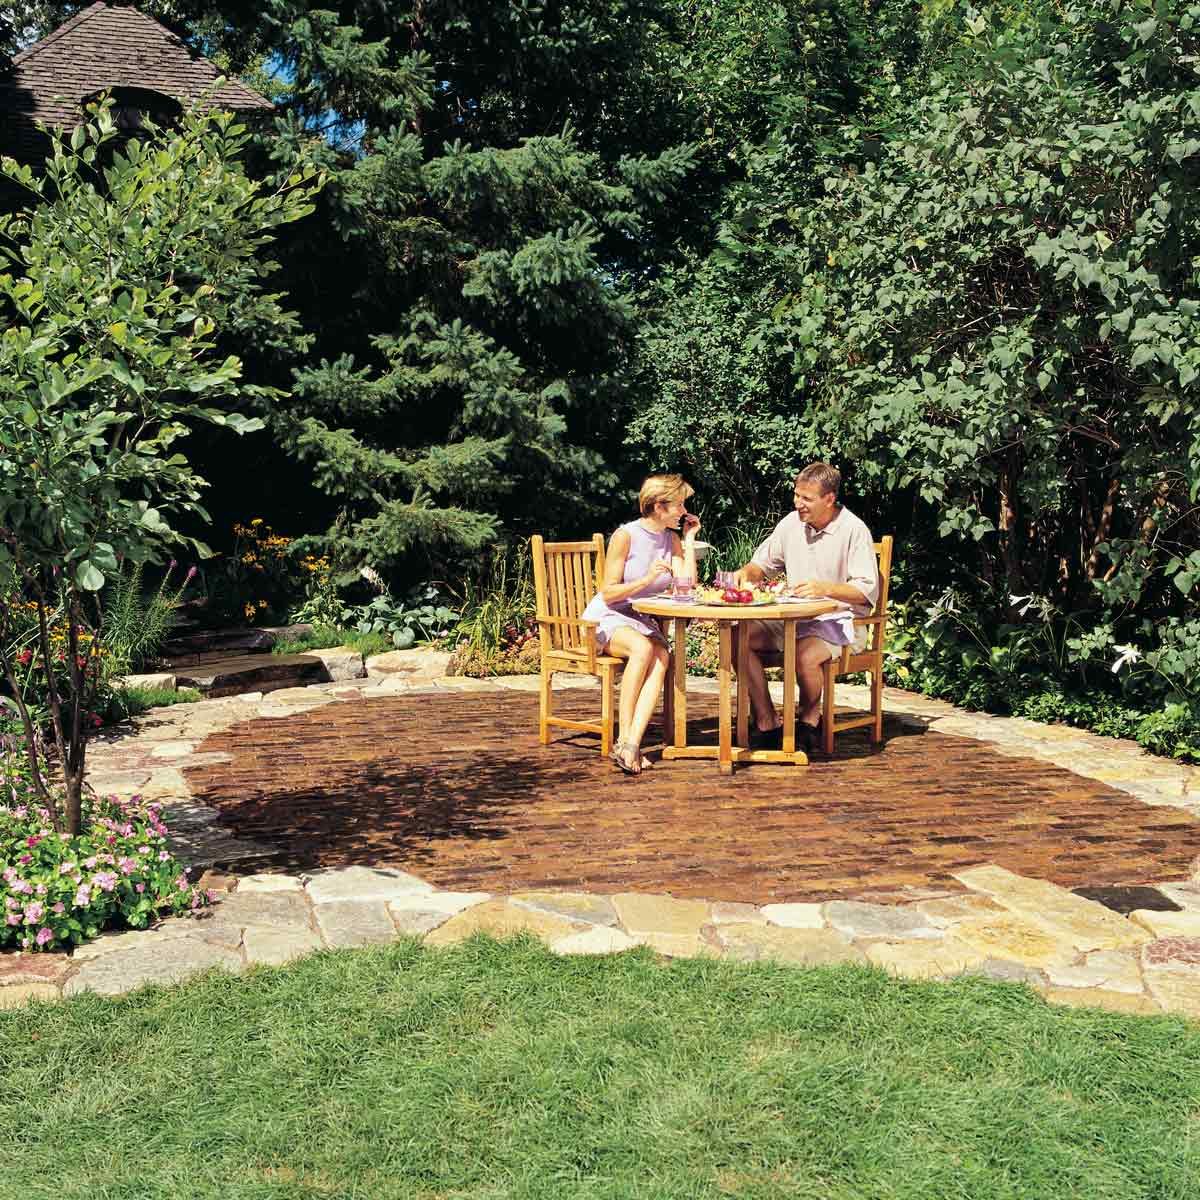 How To Build a Stone and Brick Patio (DIY)